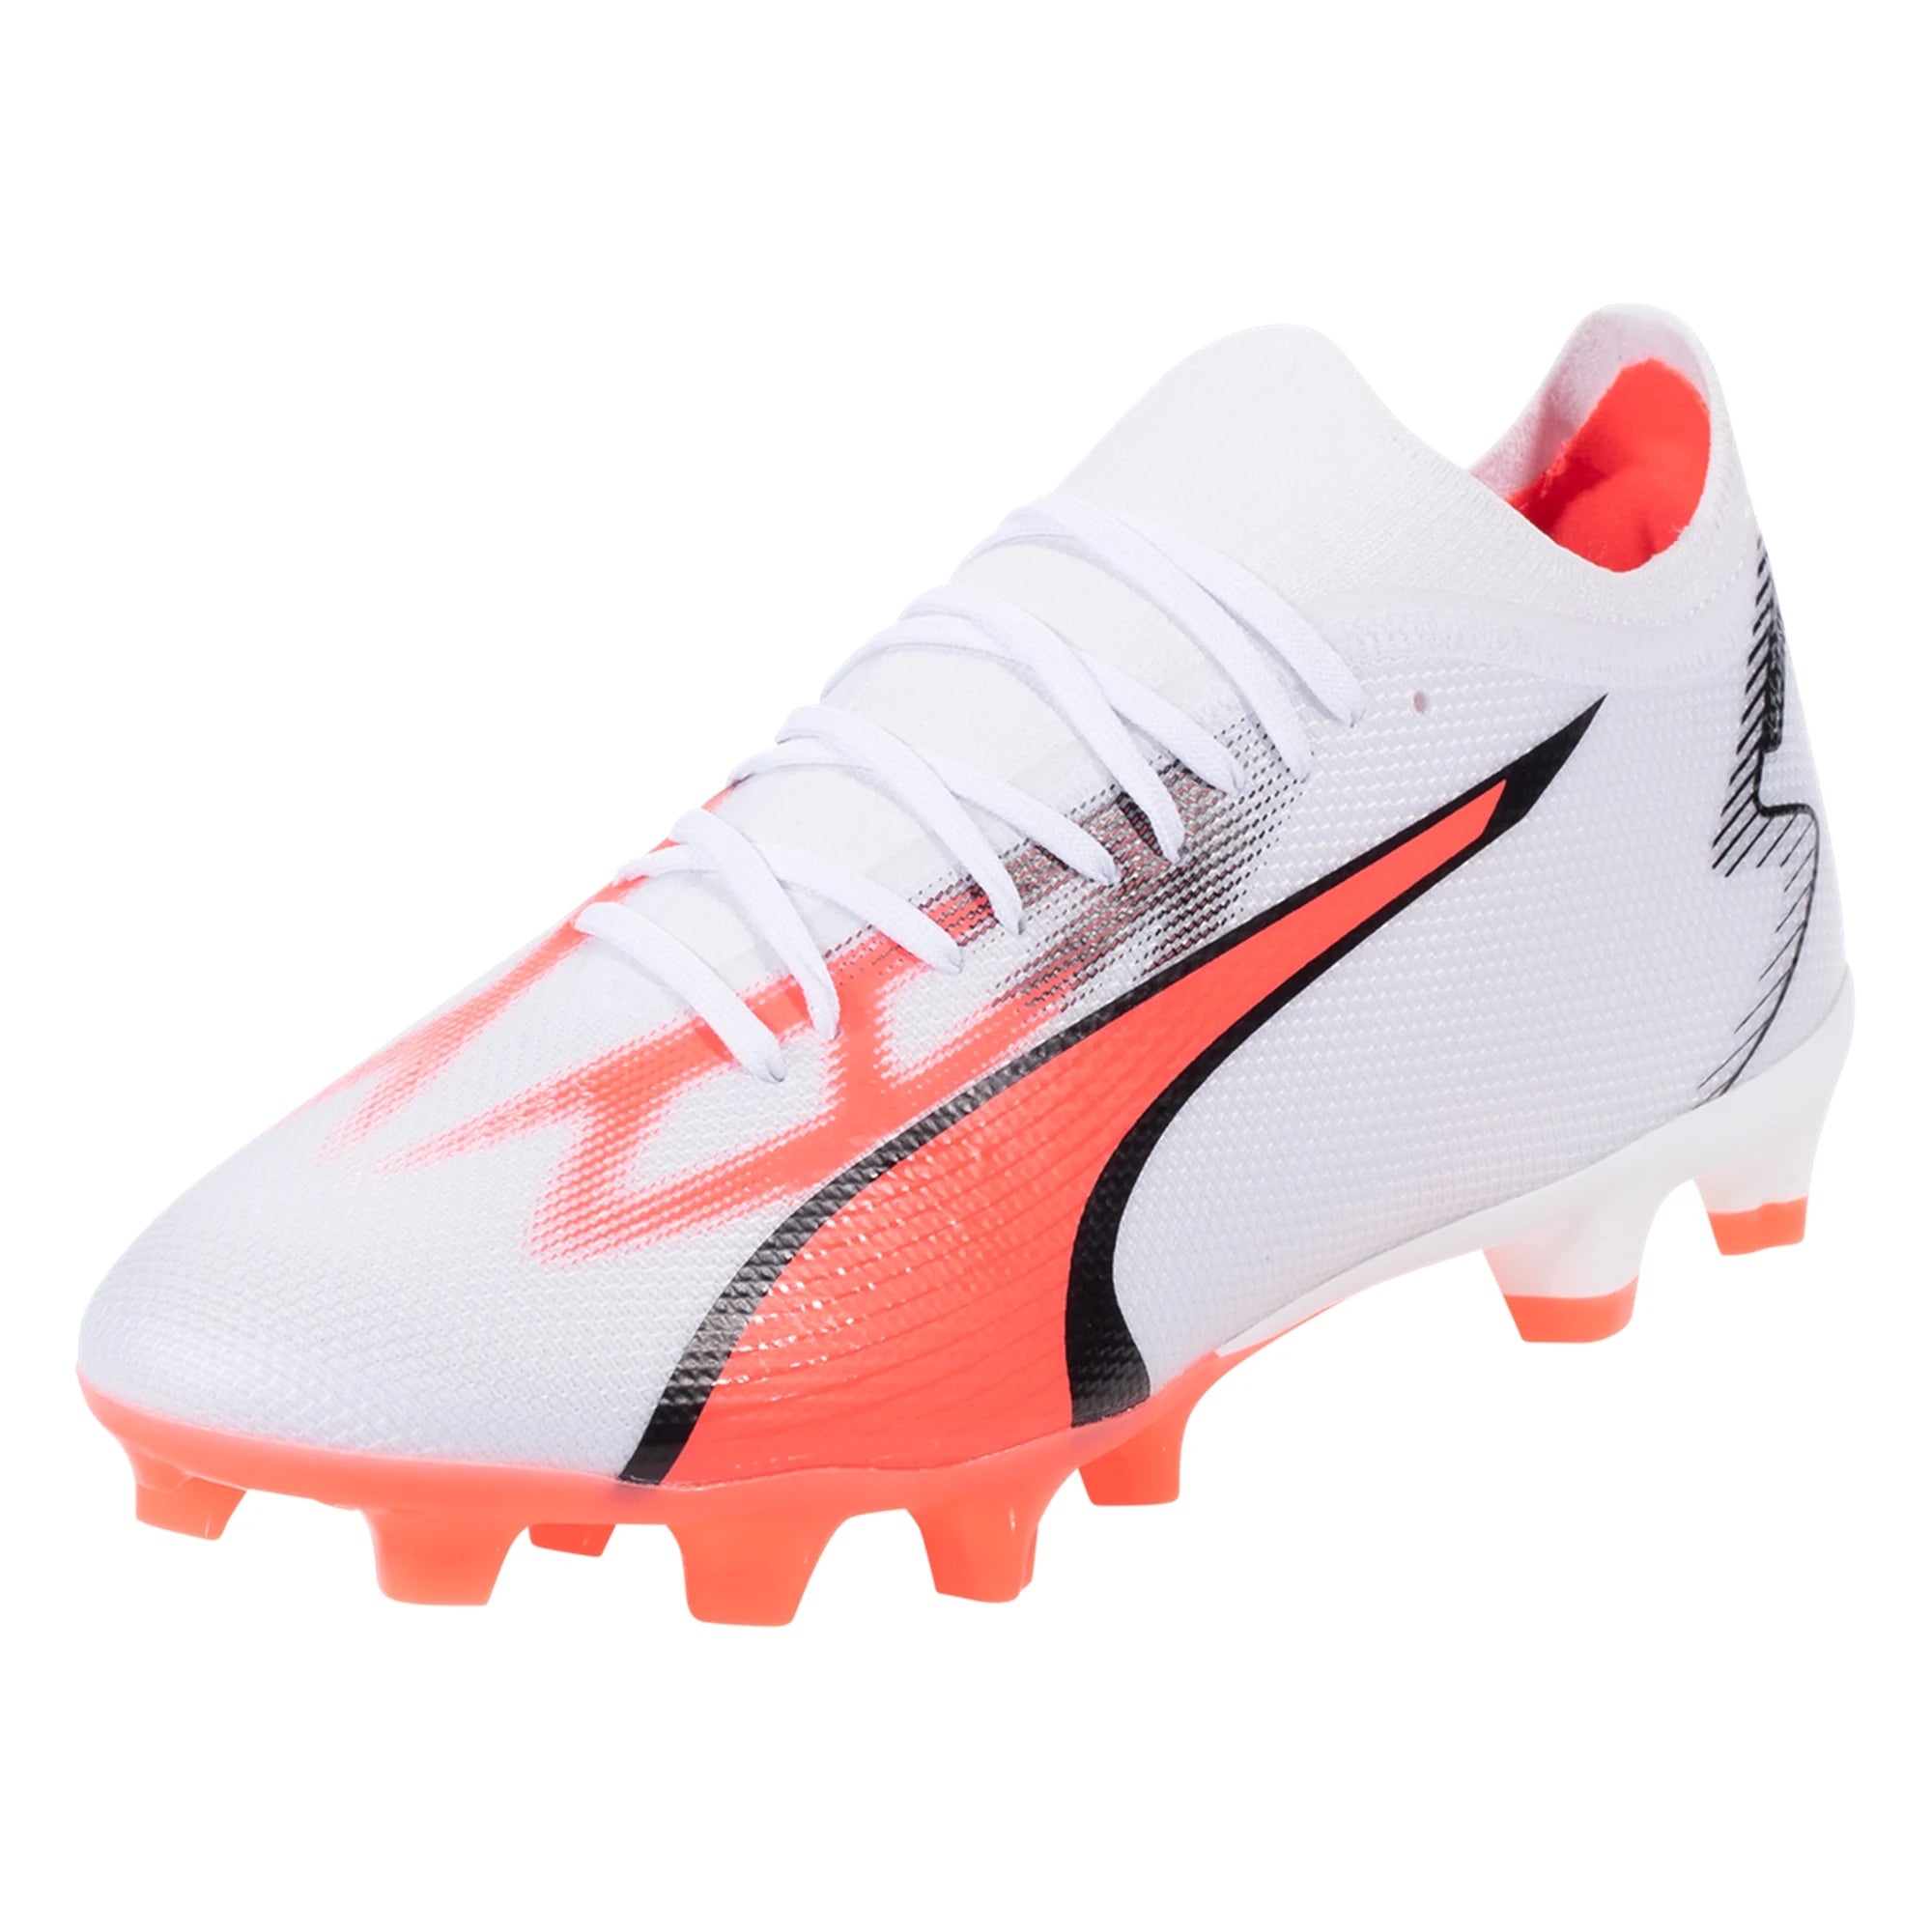 Puma Ultra Match FG/AG Firm Ground Soccer Cleat - White/Black/Fire Orchid  107347-01 – Soccer Zone USA